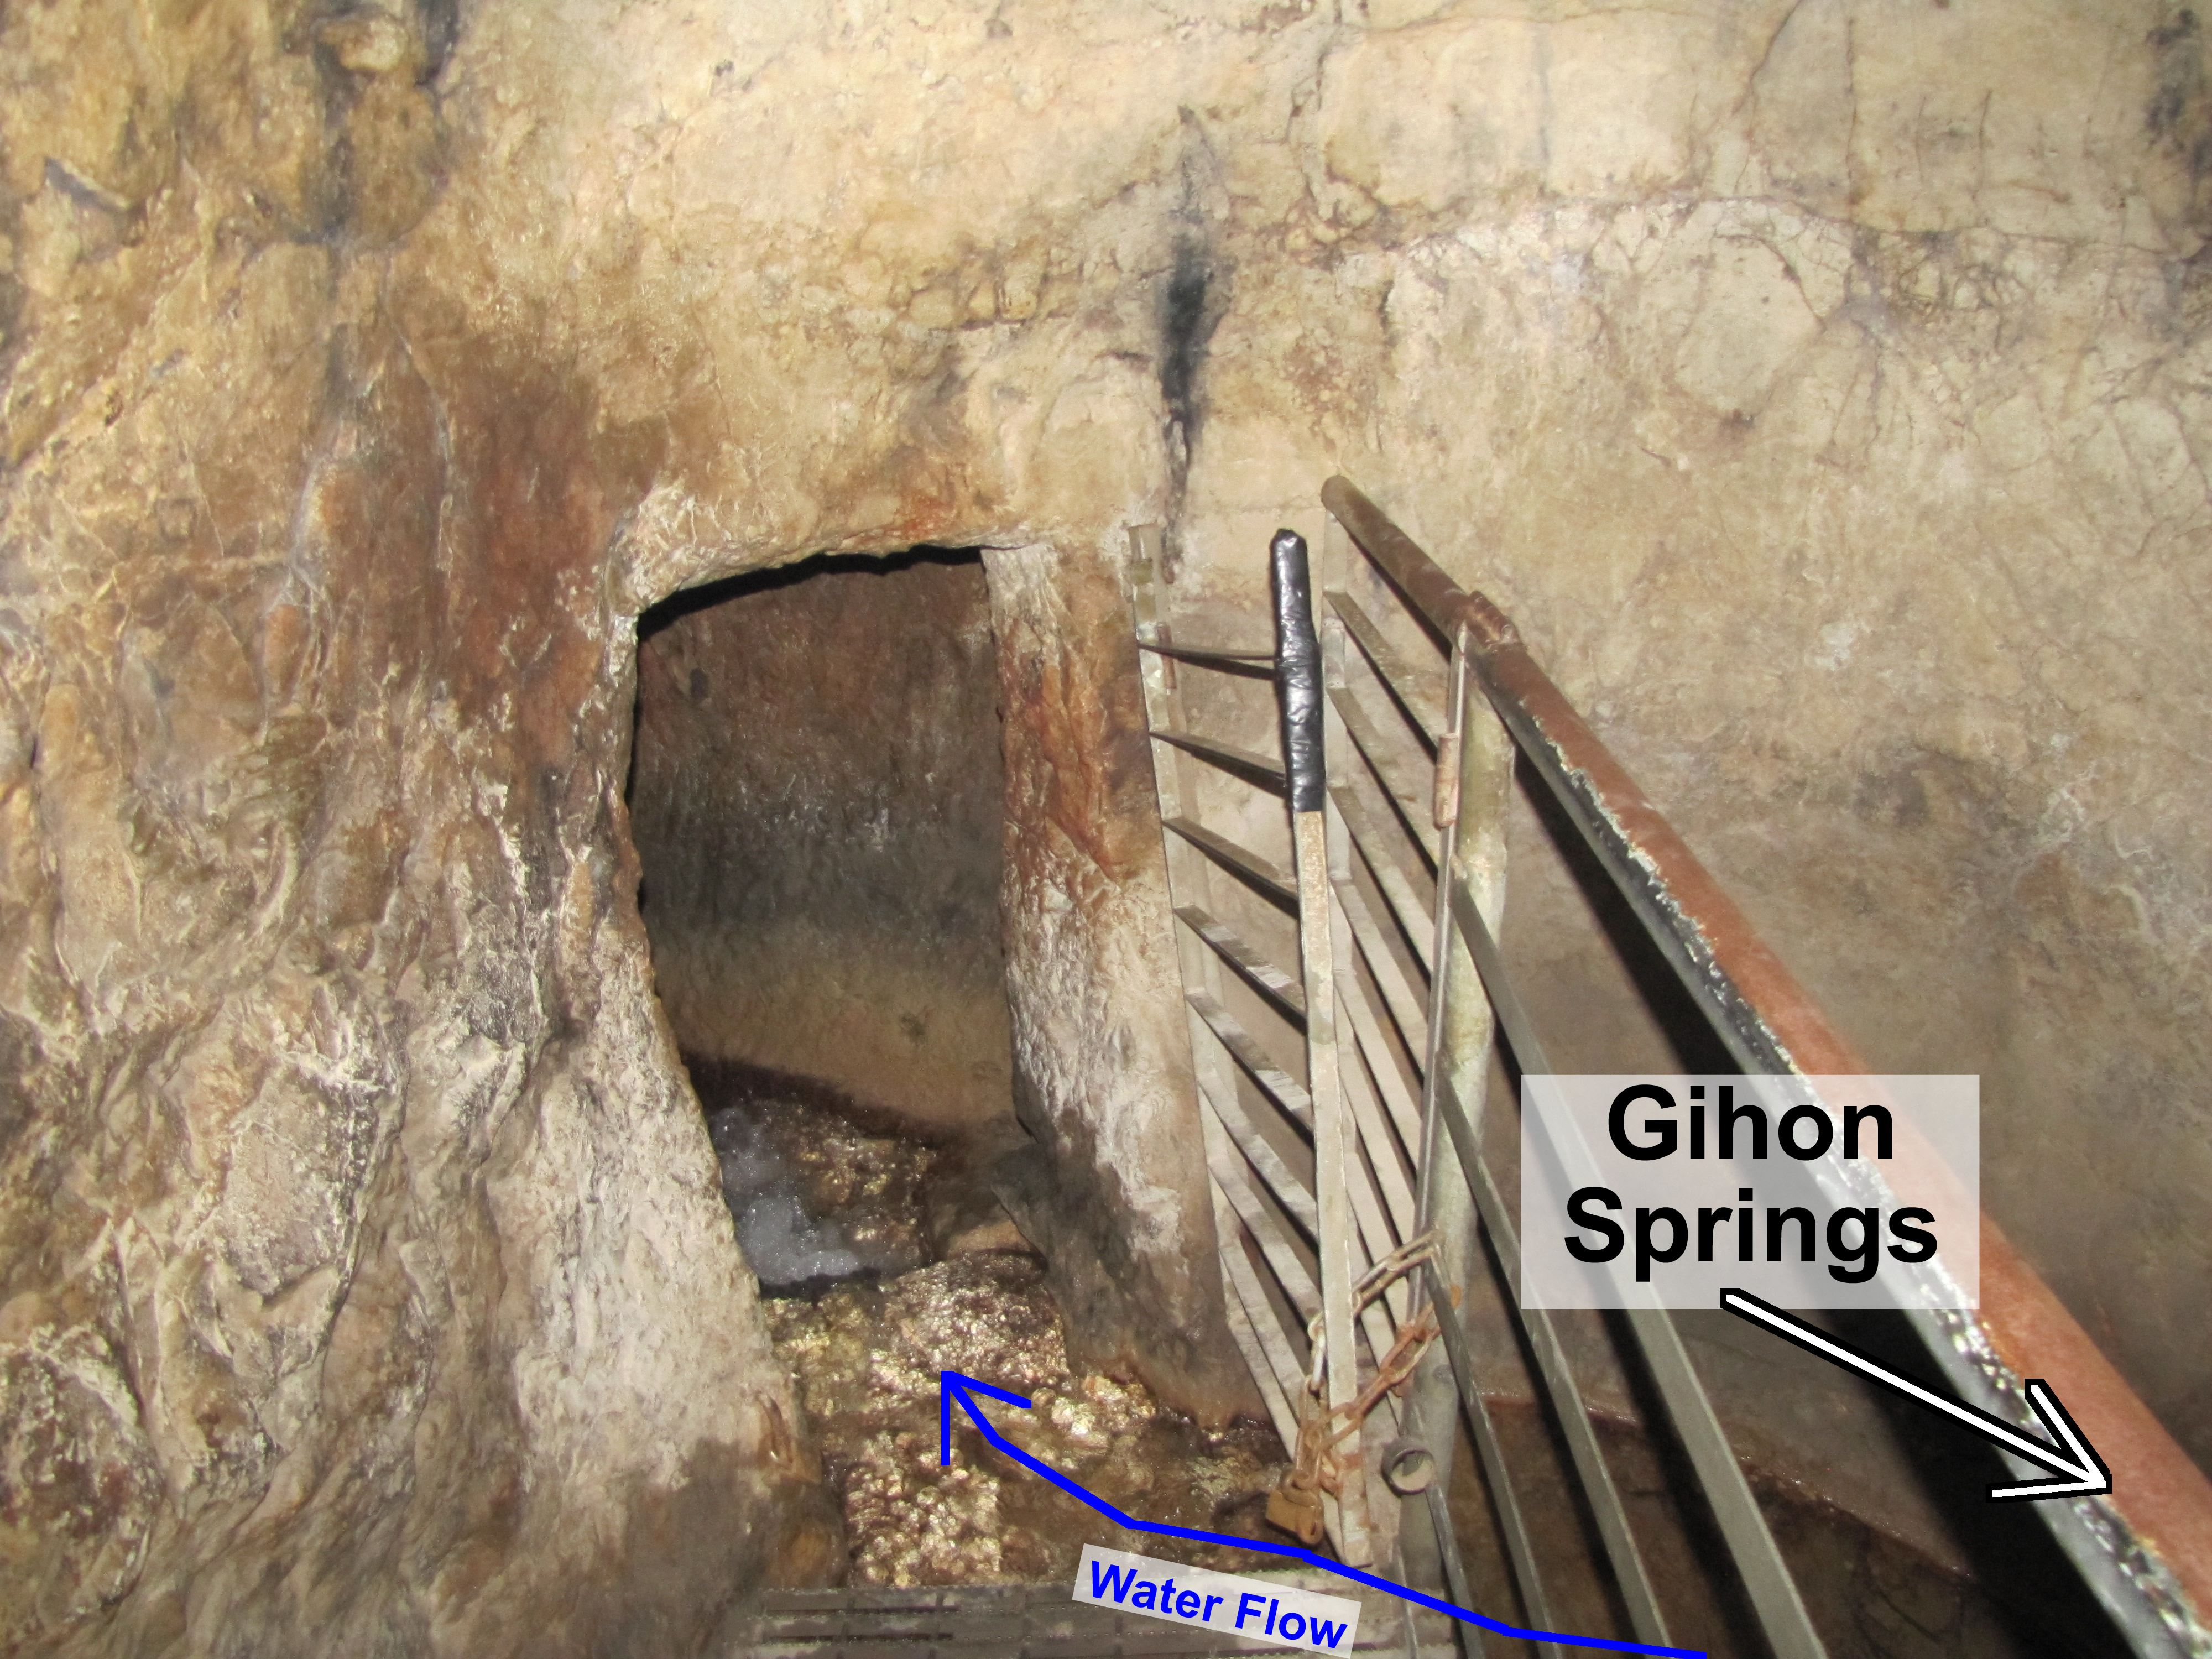 in gihon Springs Entering, tunnel that leads to Hezekiah's tunnel